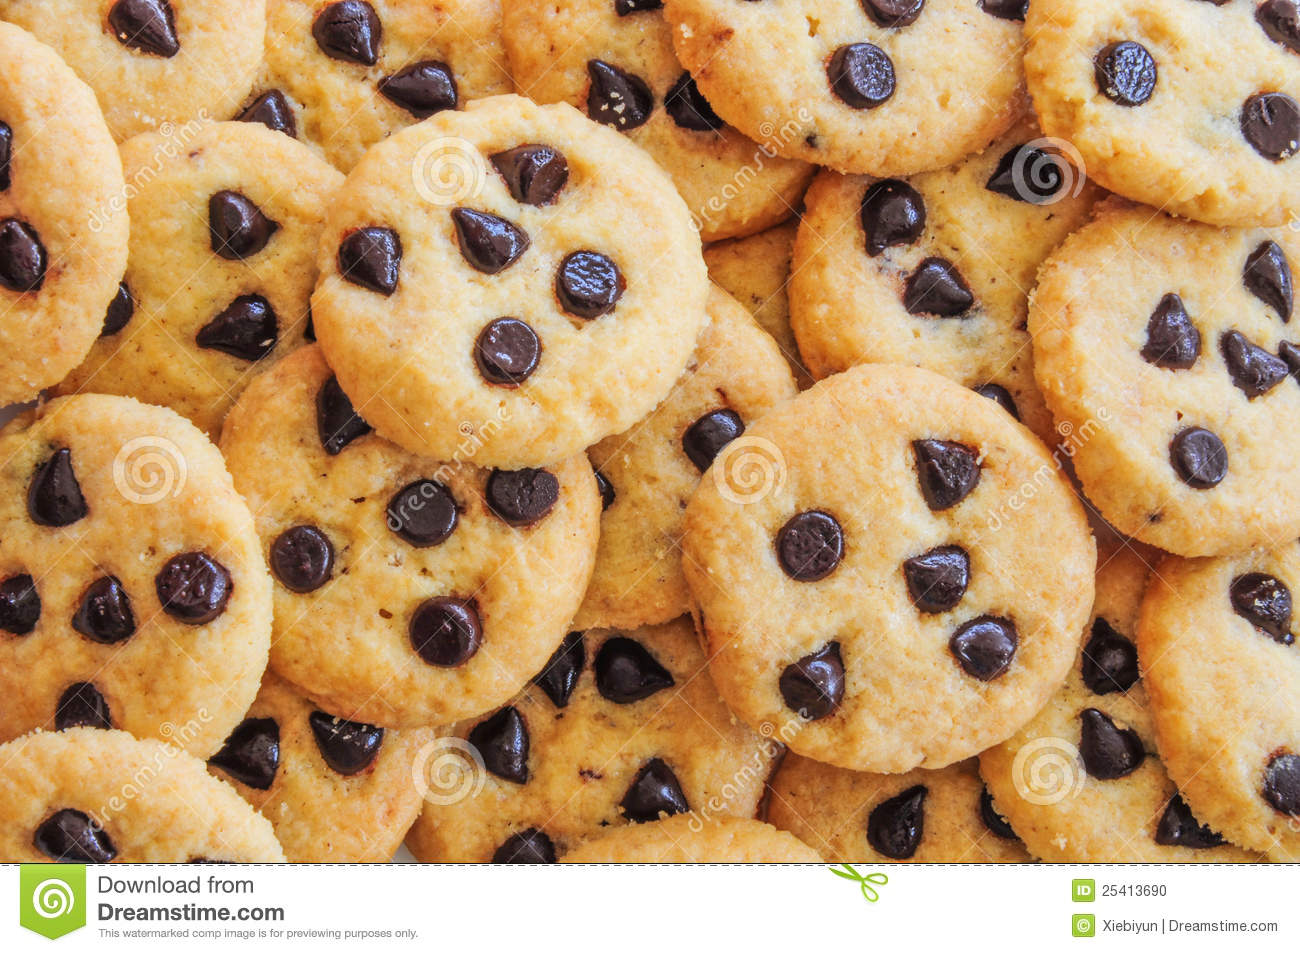 Chocolate Chip Cookie Cute Cookie Wallpapers